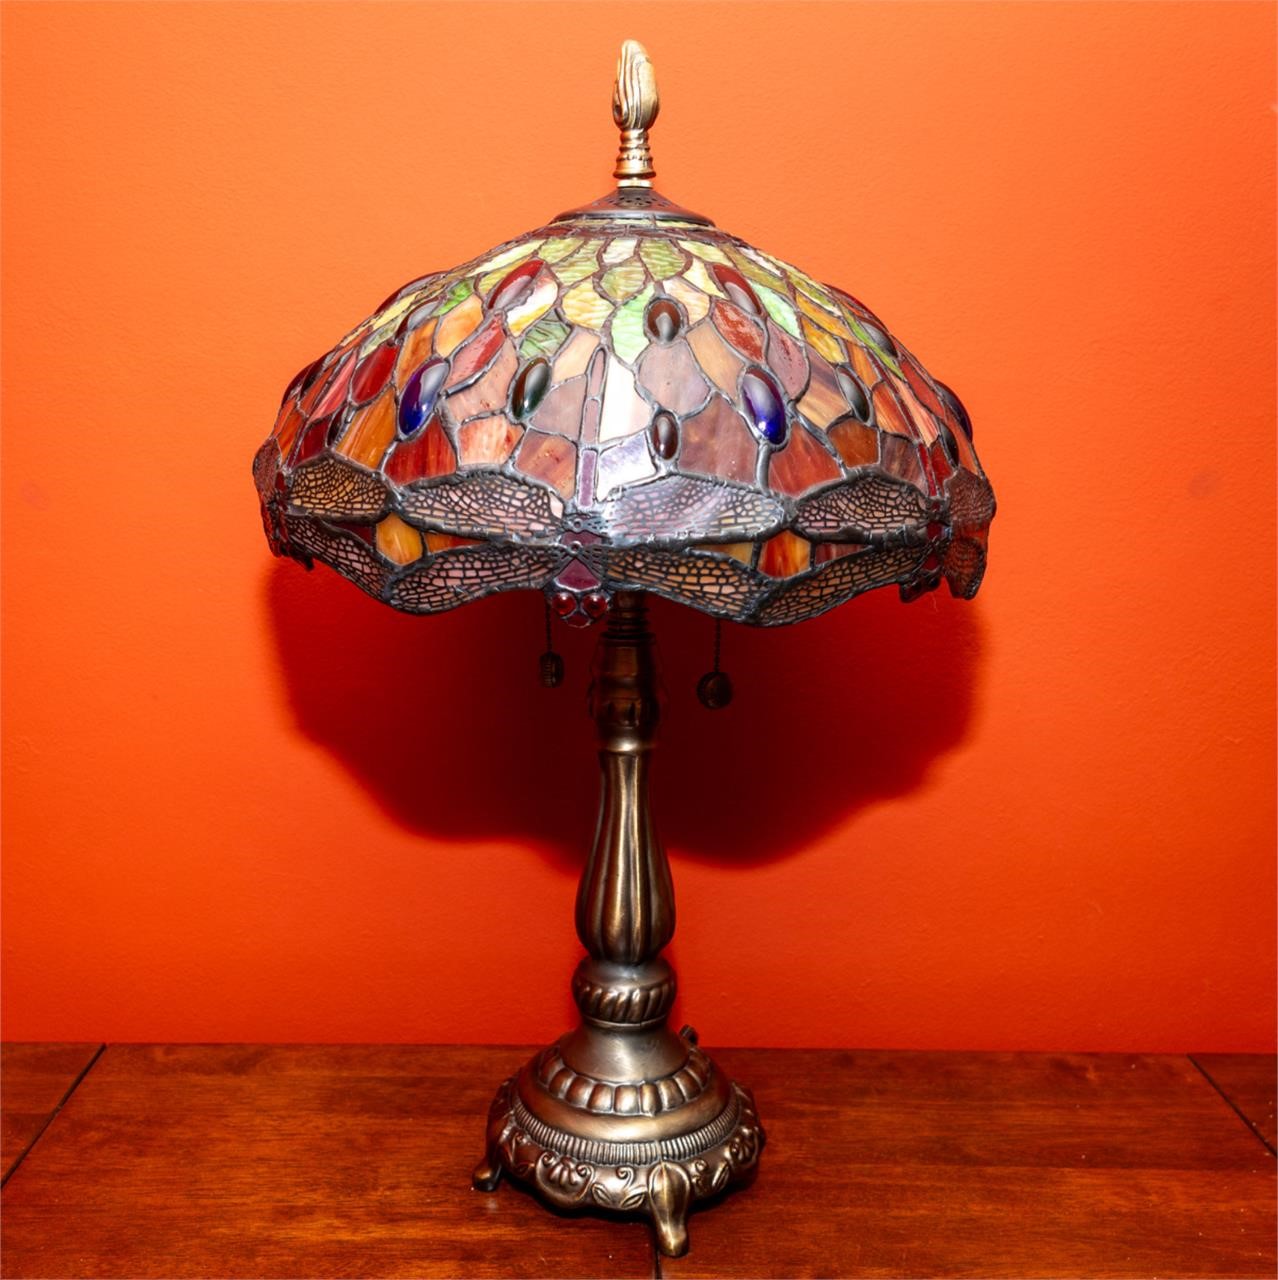 A lovely Tiffany-inspired table lamp